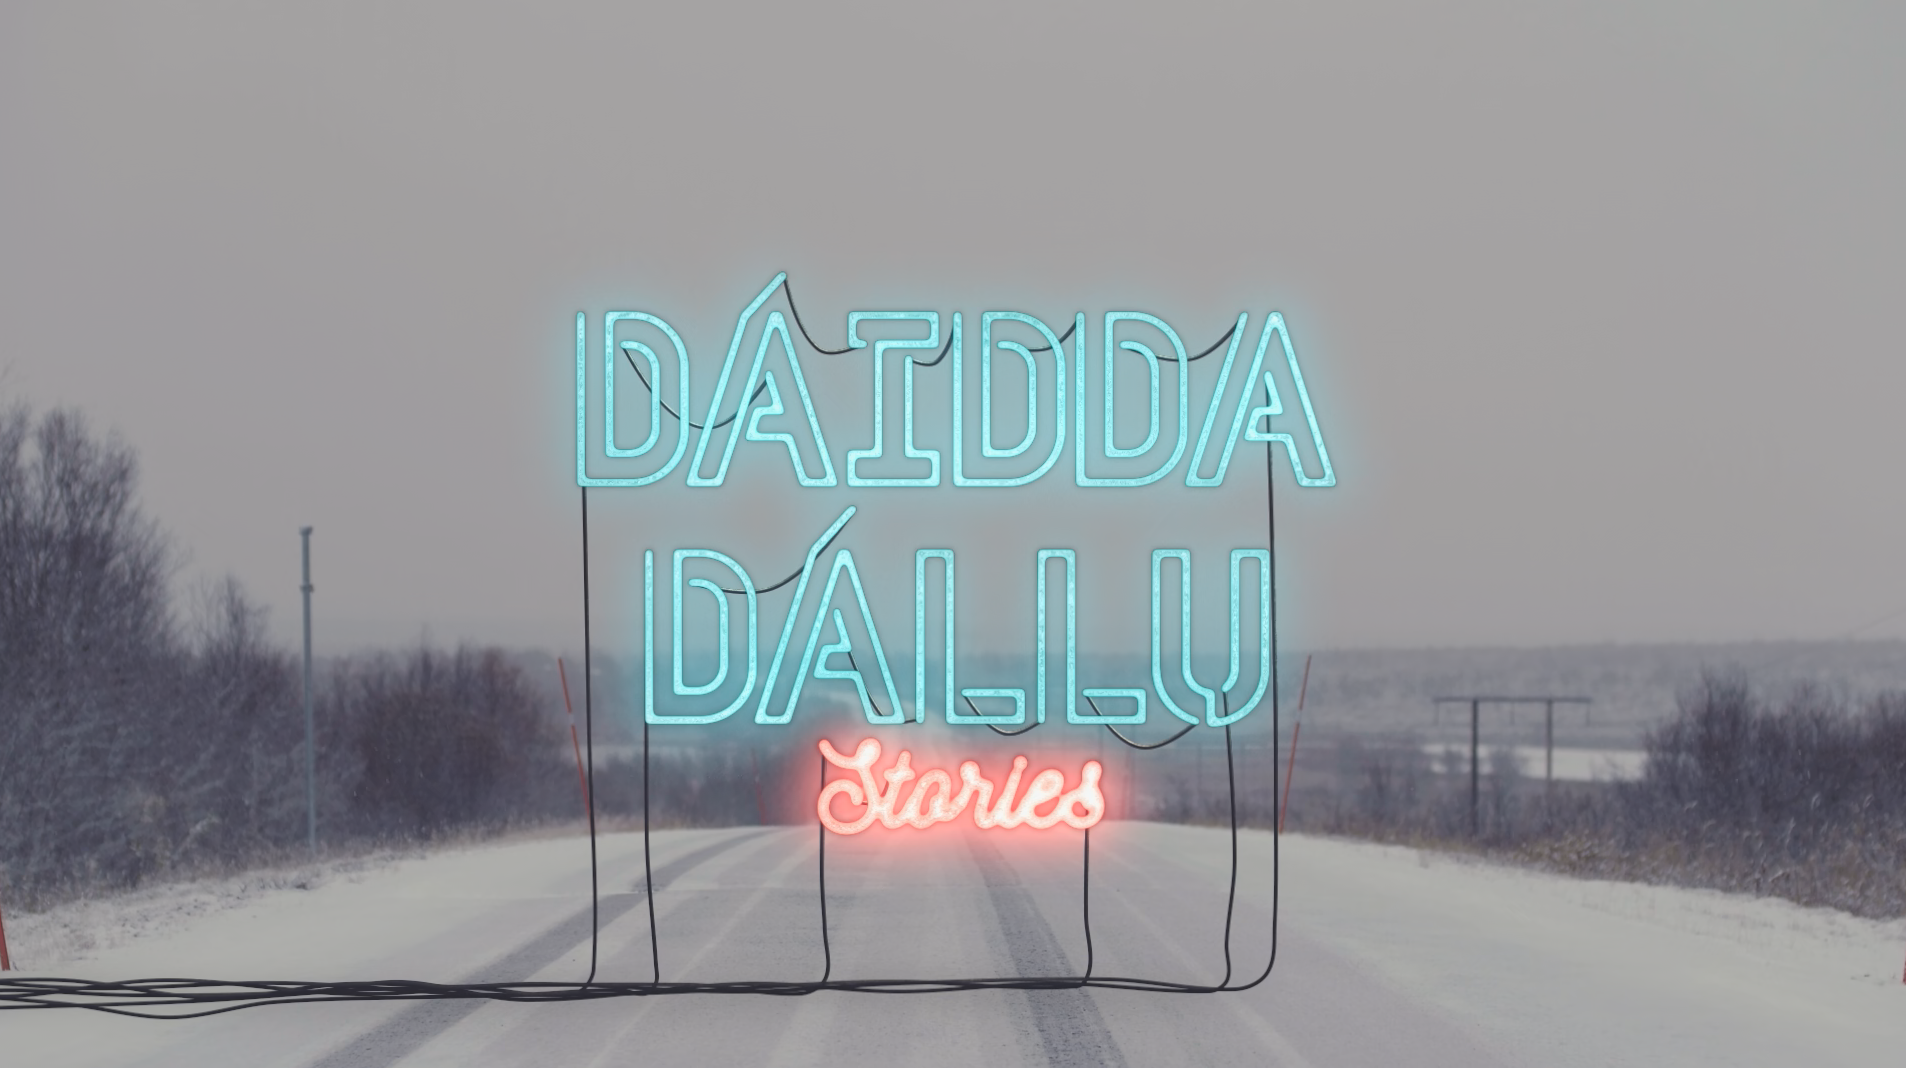  Still image from the film  Dáiddadállu stories  with film portraits about the collective and artists. Screenshot courtesy of Dáiddadállu.  